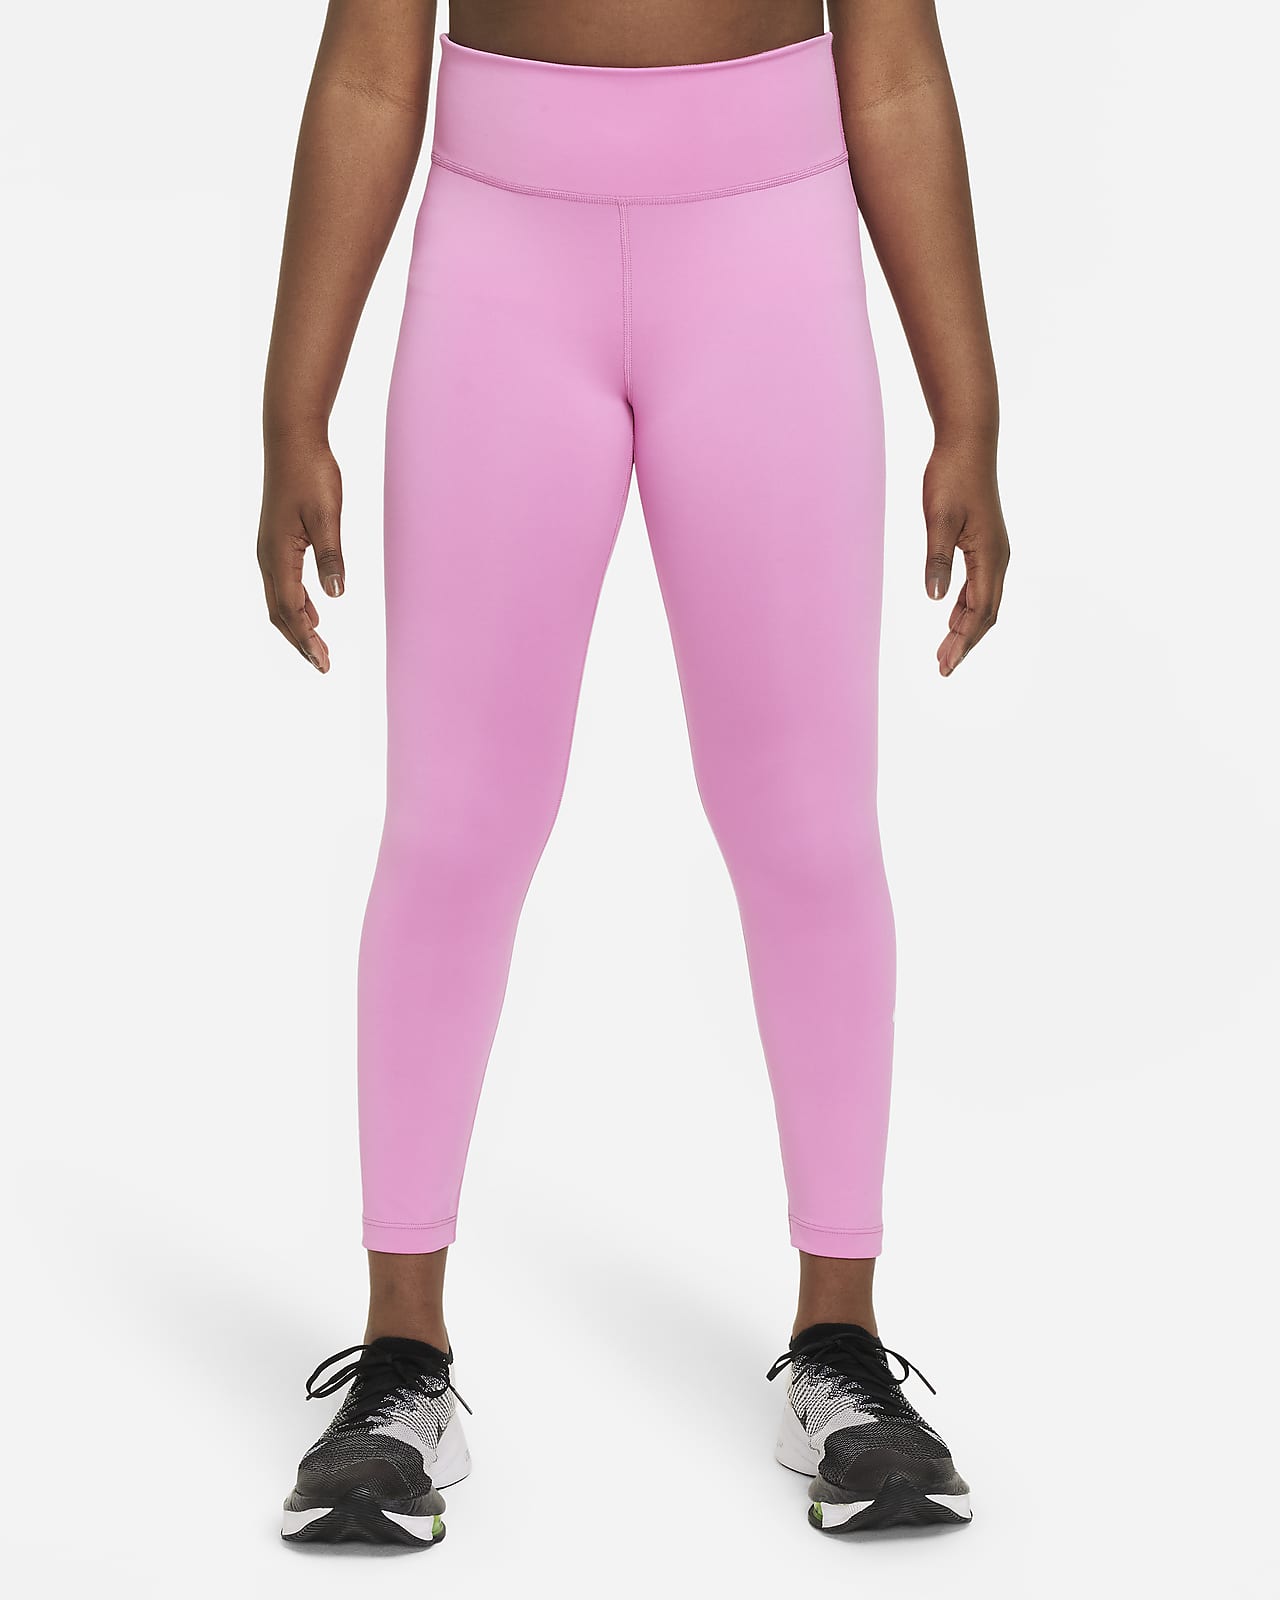 Nike: Girls' Dri-FIT One Tights - Size XL, Girl's